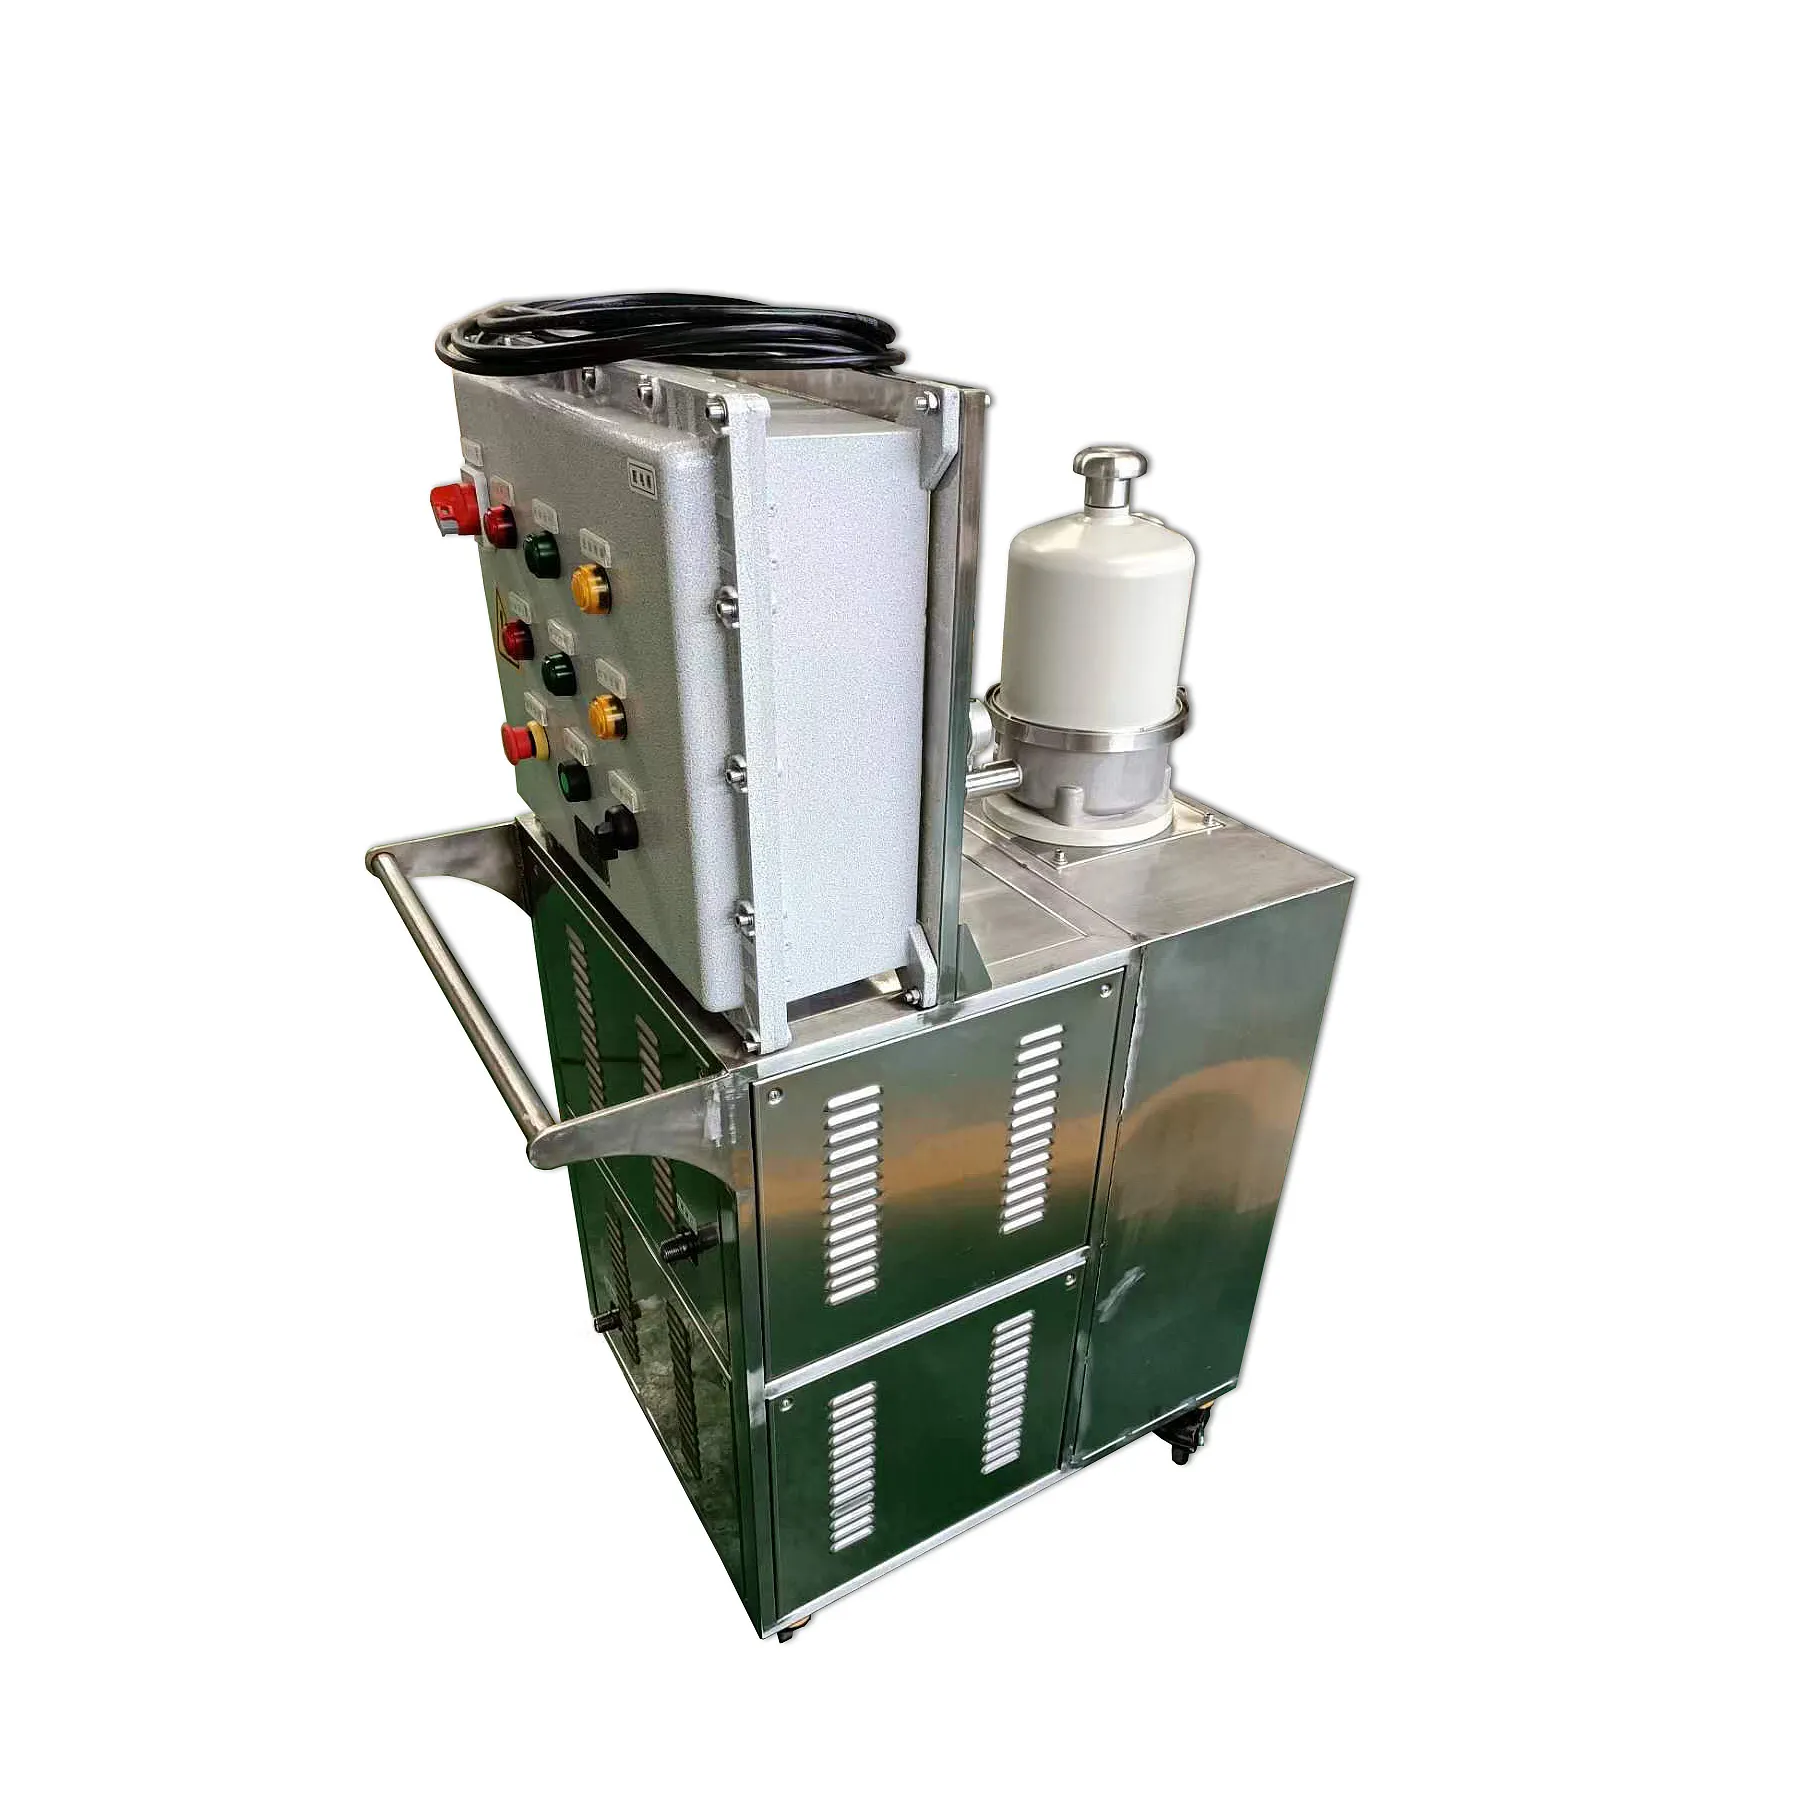 Explosion-proof oil filtration system